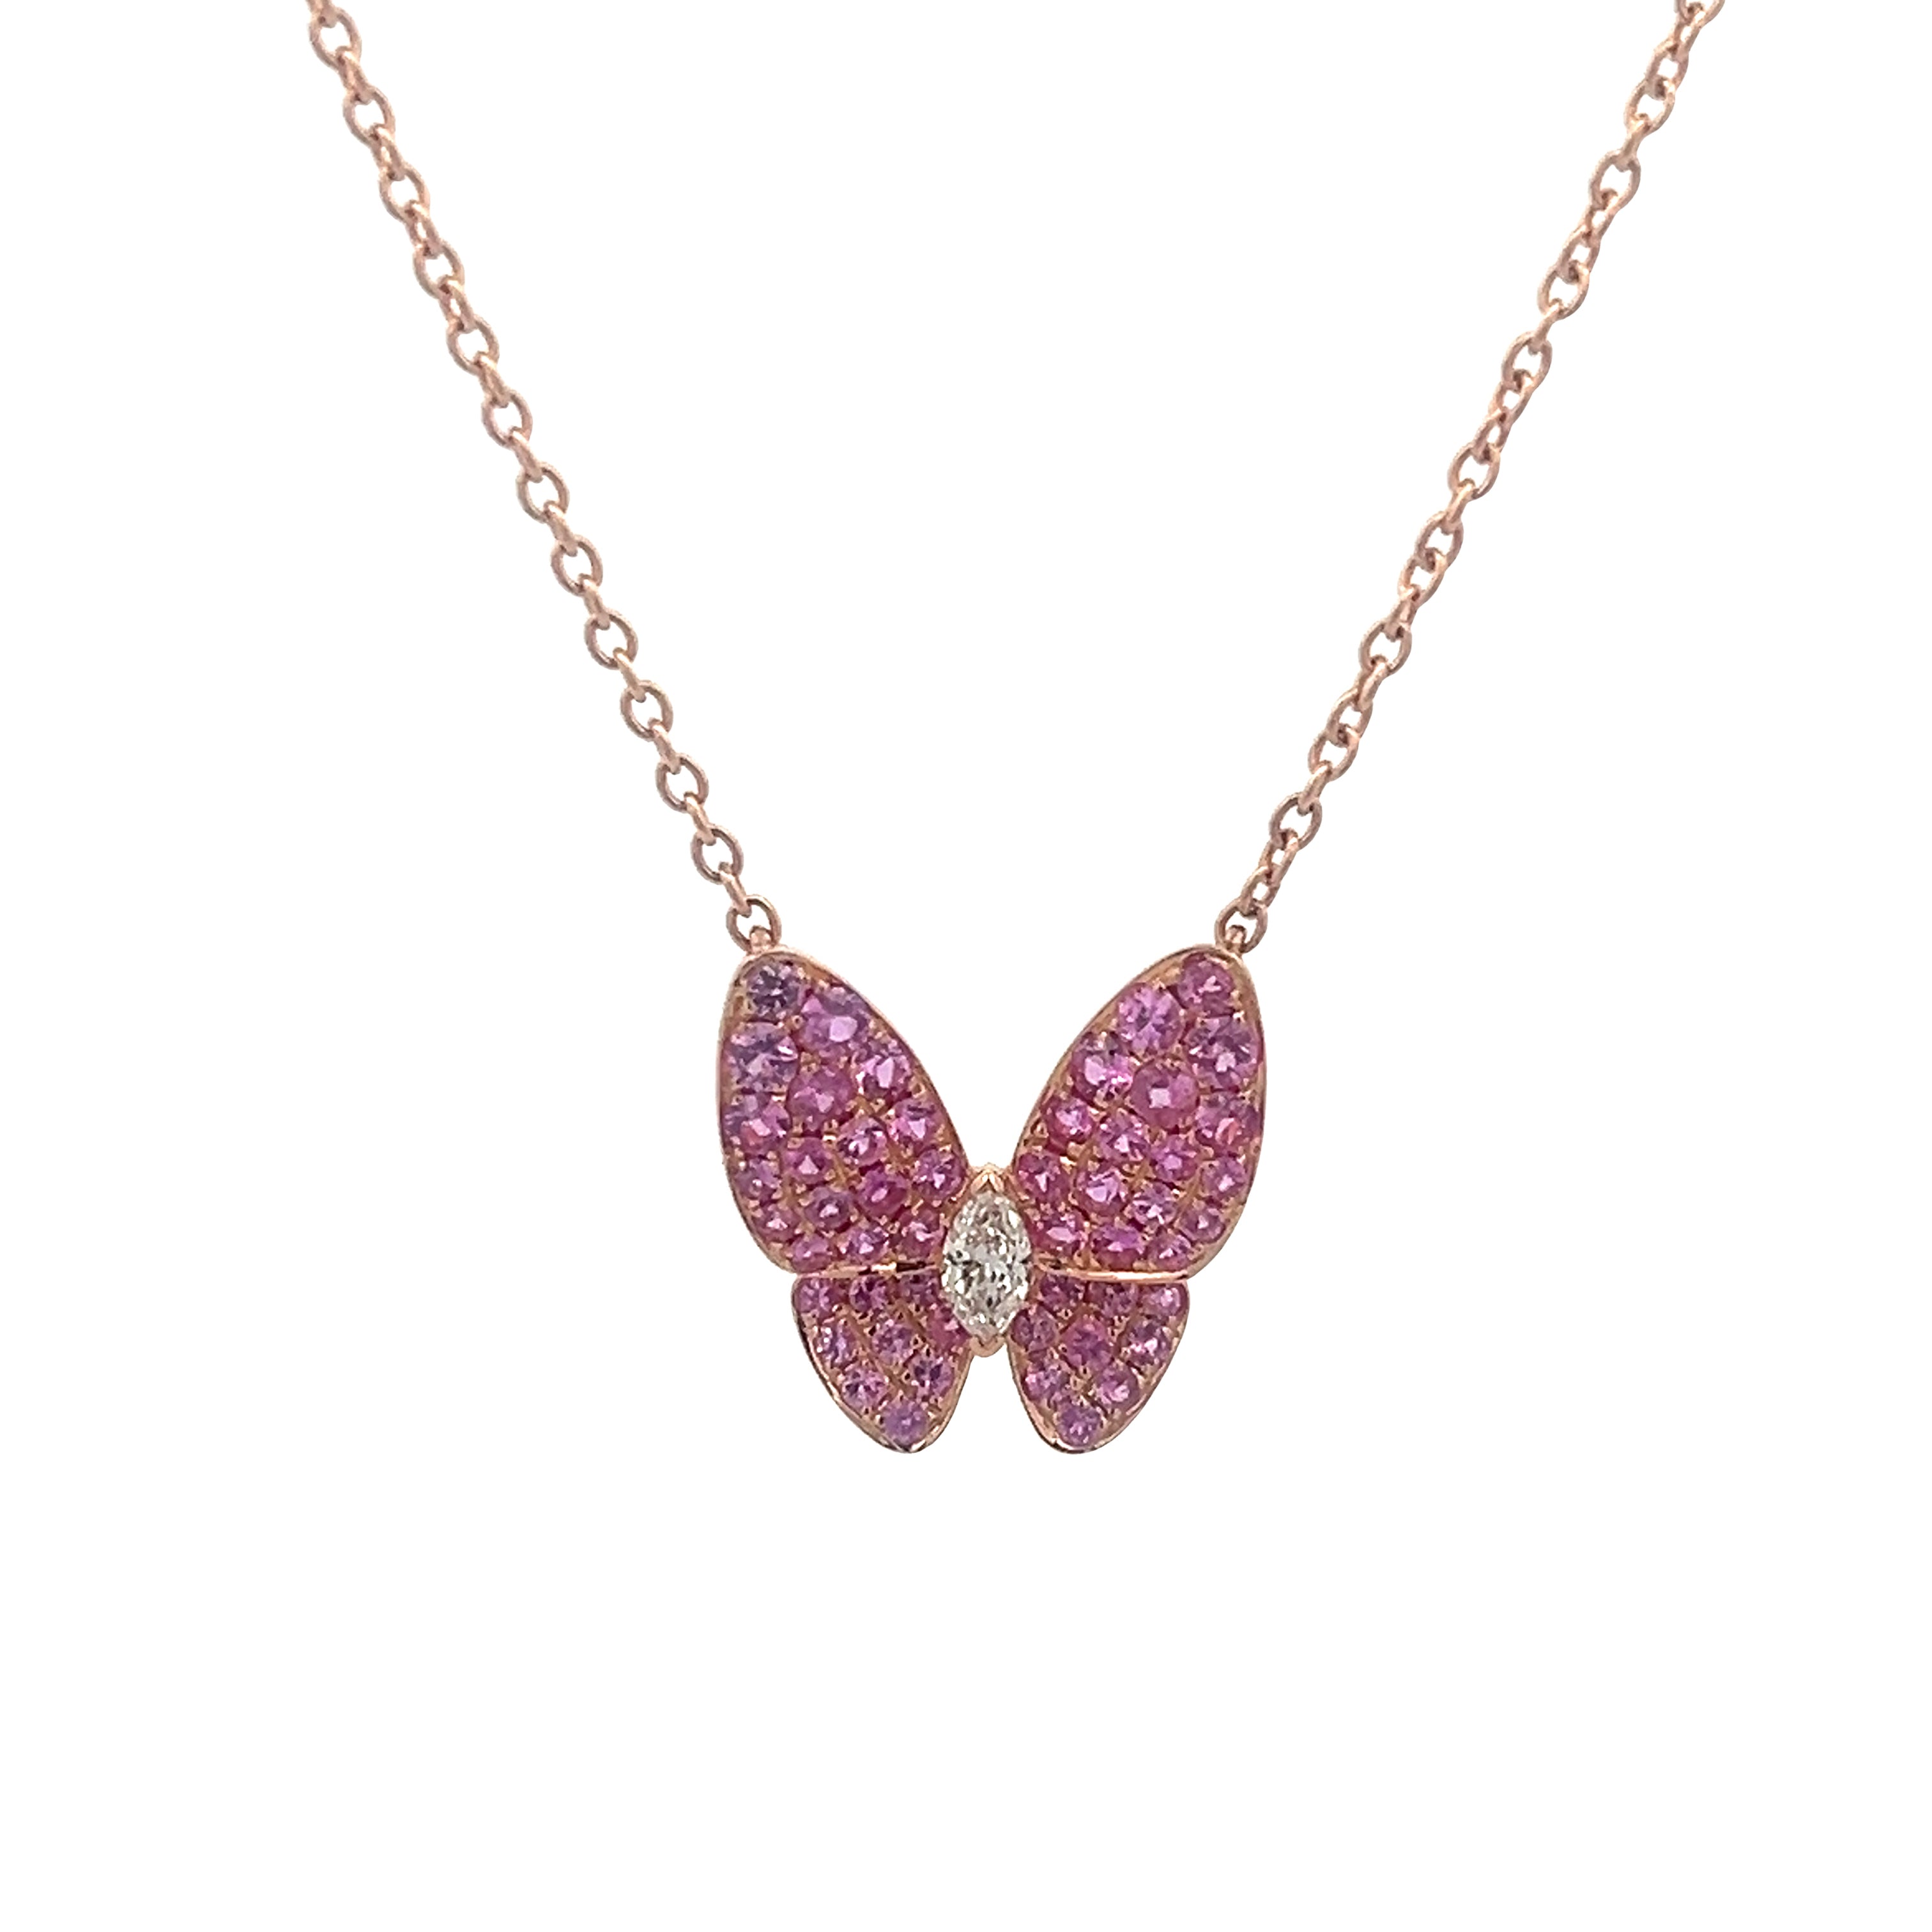 18K ROSE GOLD NECKLACE WITH PINK SAPPHIRE